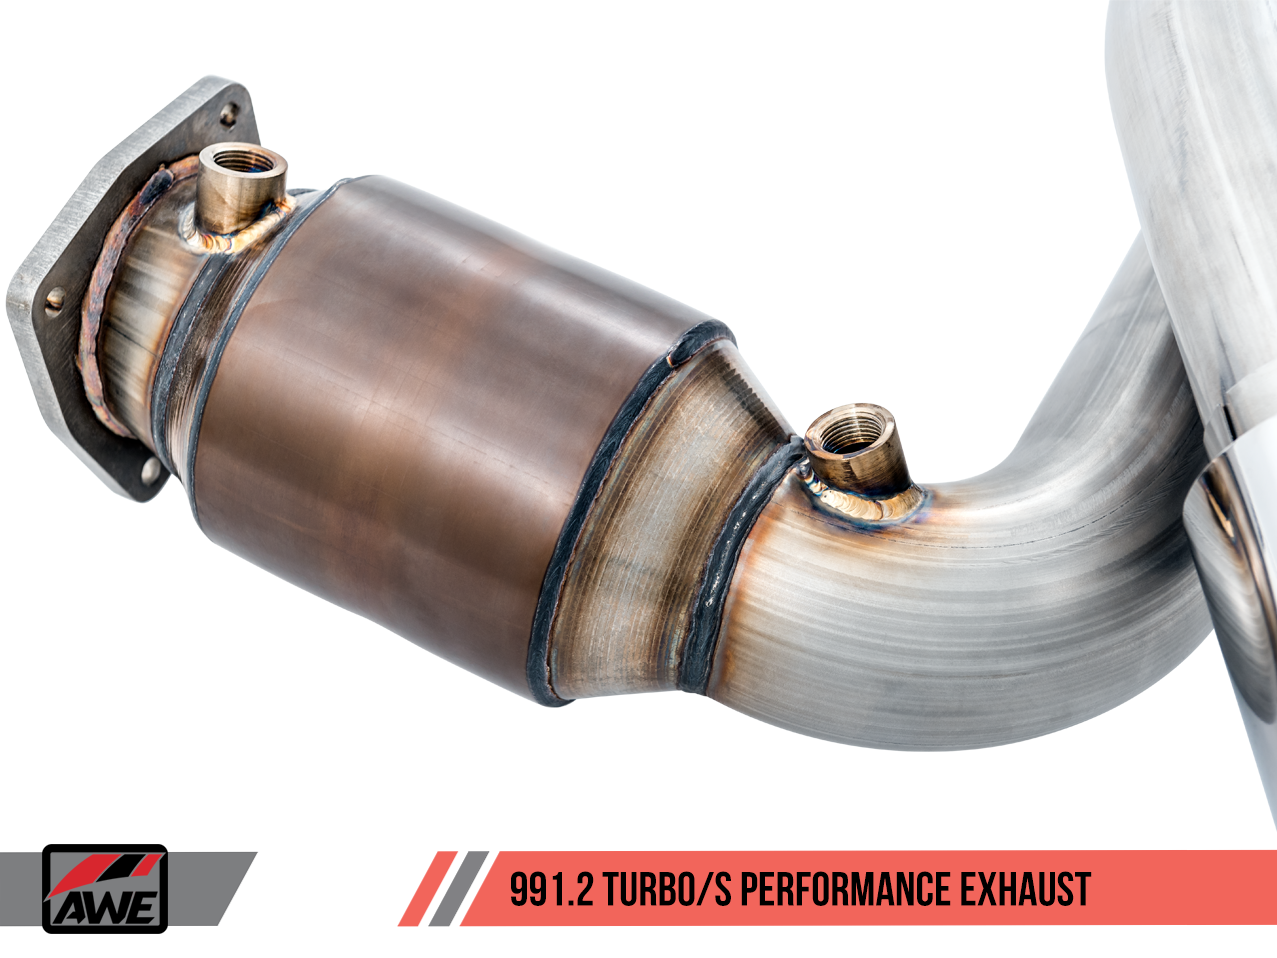 AWE Performance Exhaust and High-Flow Cat Sections for Porsche 991.2 Turbo - With Diamond Black Quad Tips